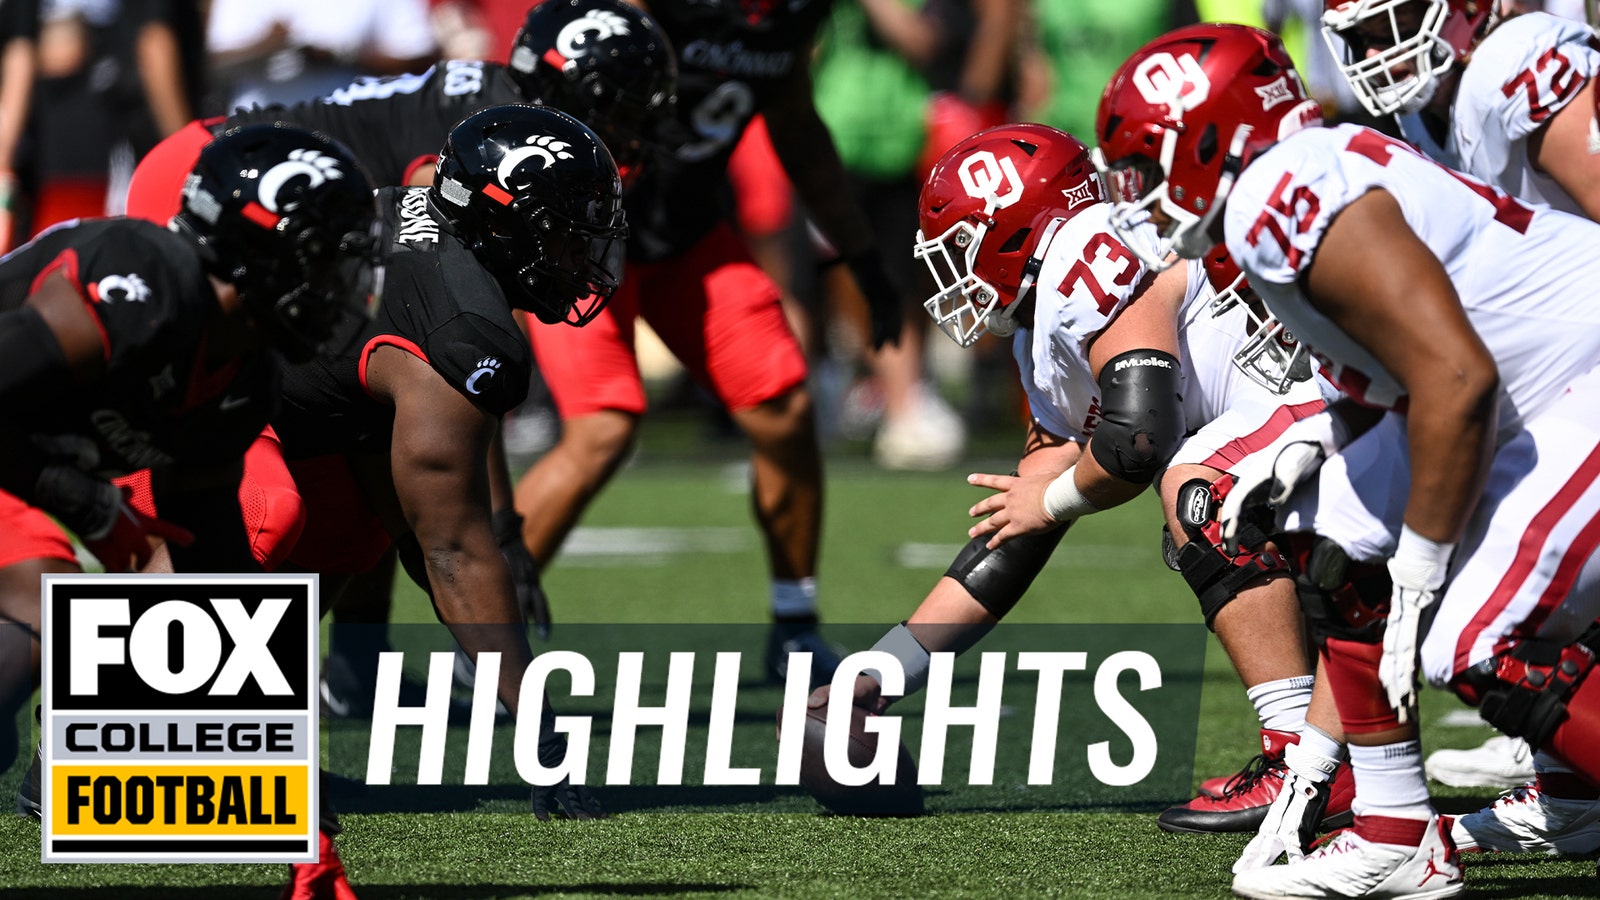 Highlights: Check out the top plays from Oklahoma vs. Cincinnati